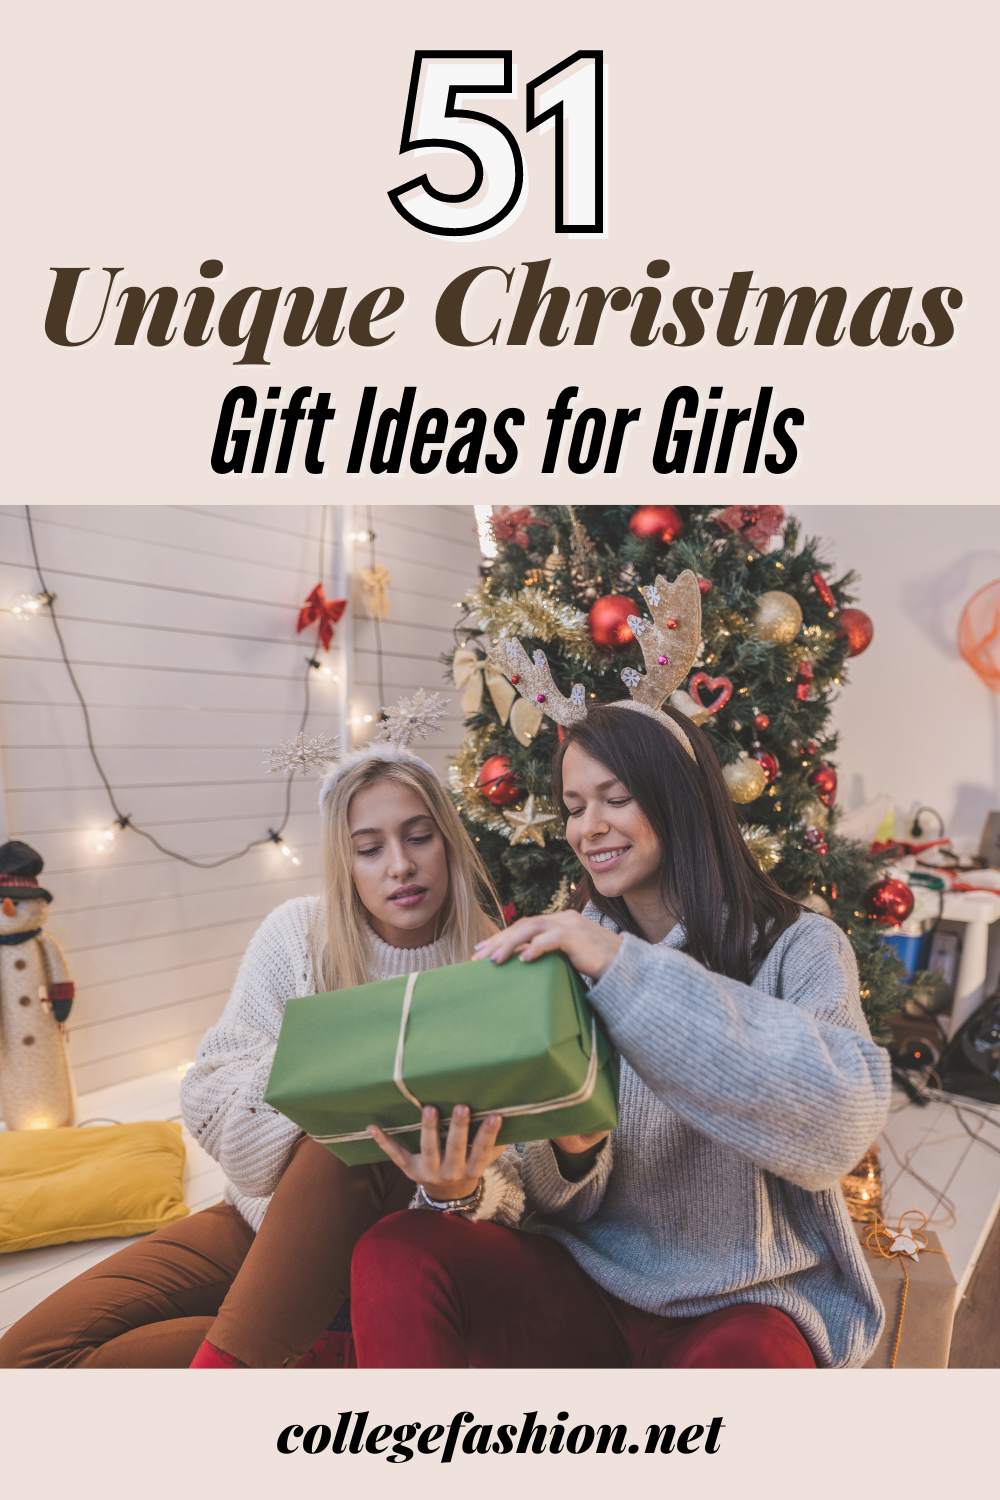 51 Unique Christmas Gift Ideas for Girls - College Fashion